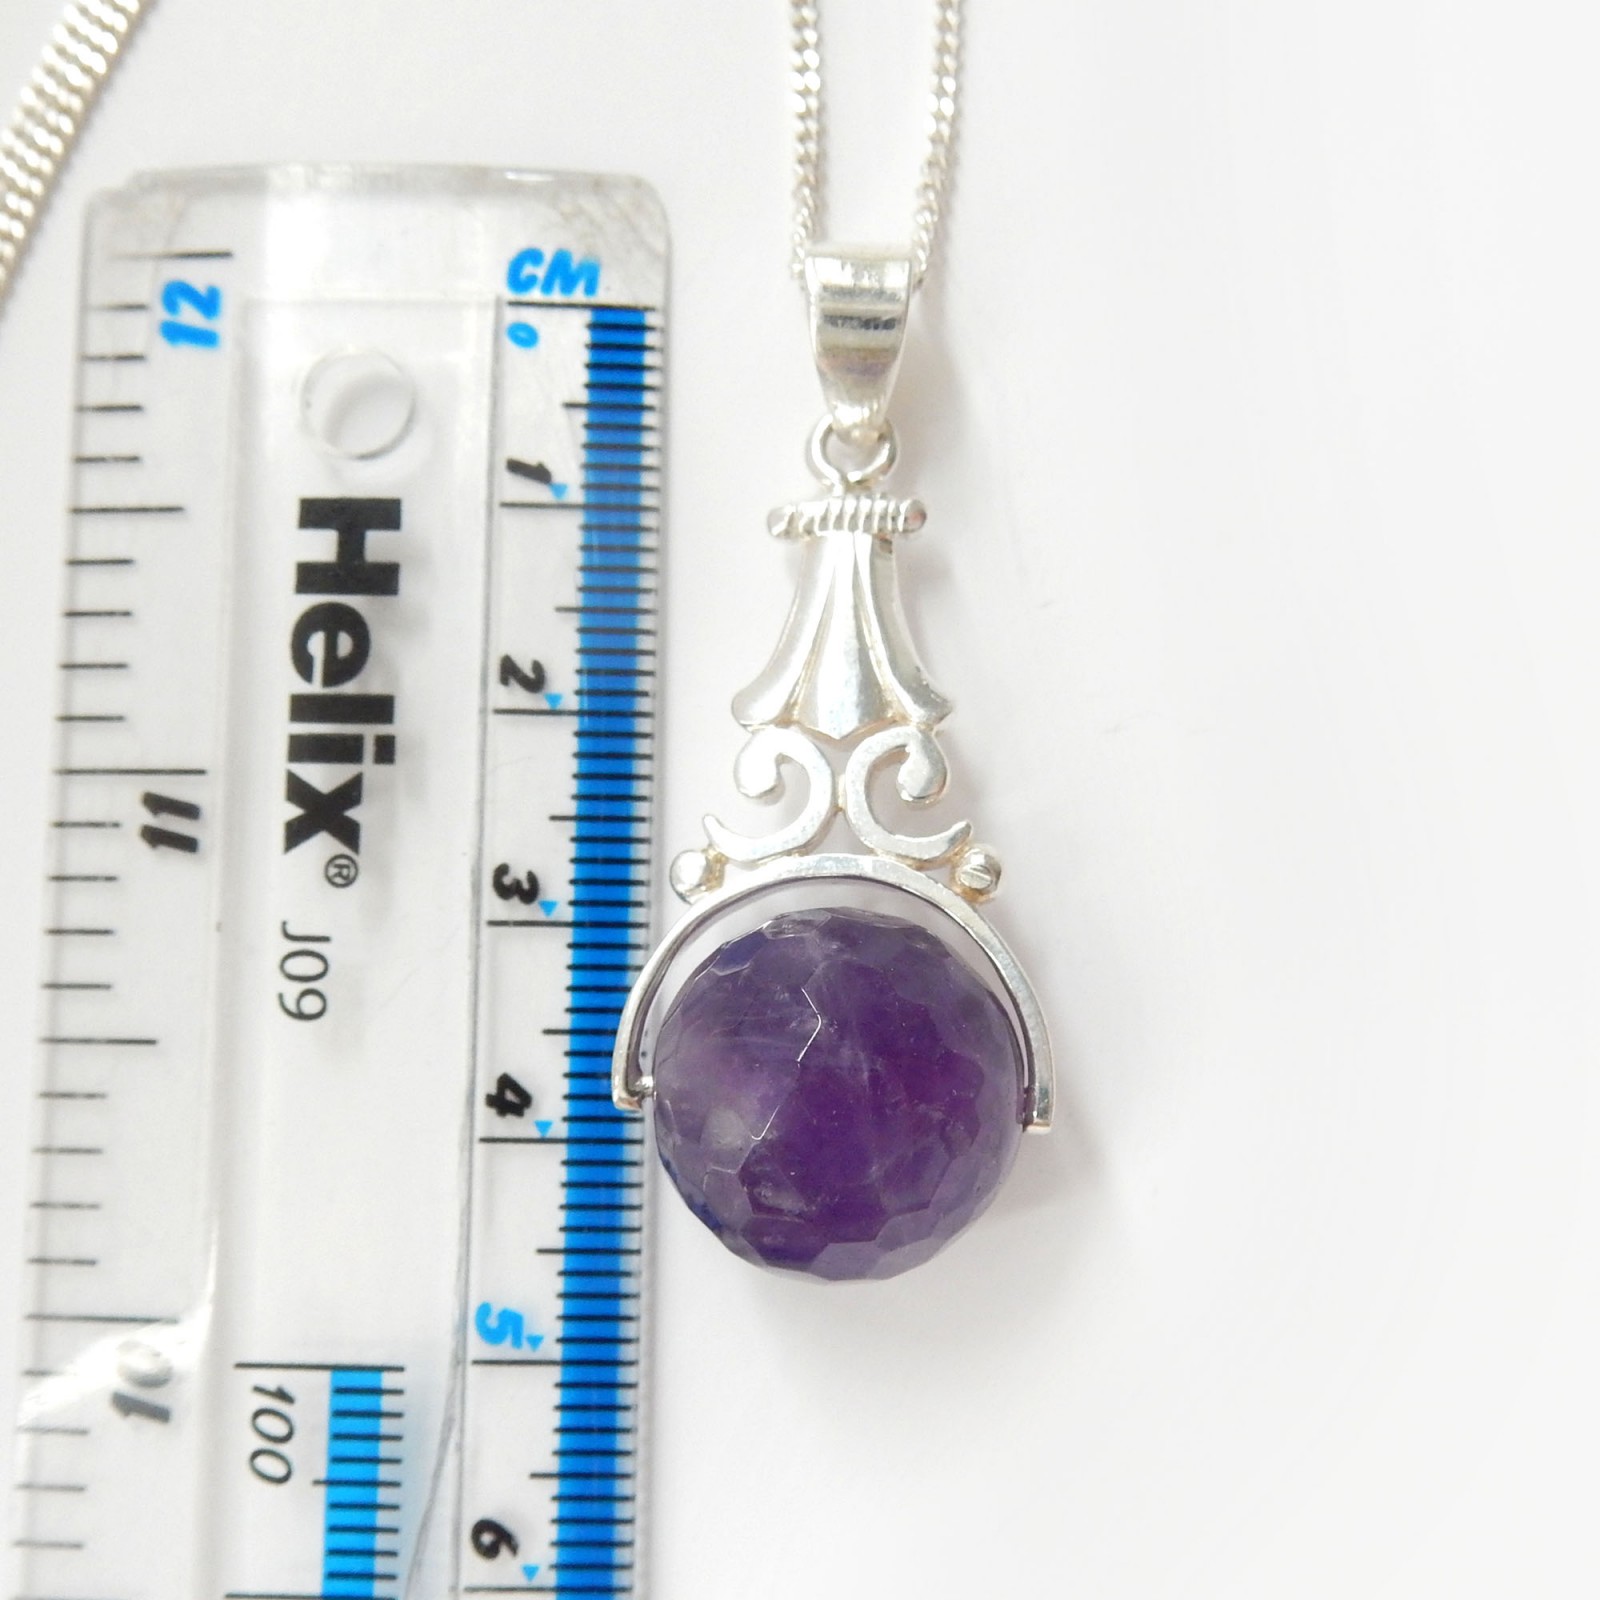 FEBRUARY AMETHYST PURPLE Sterling Silver Birthstone Necklace and Glass Pendant